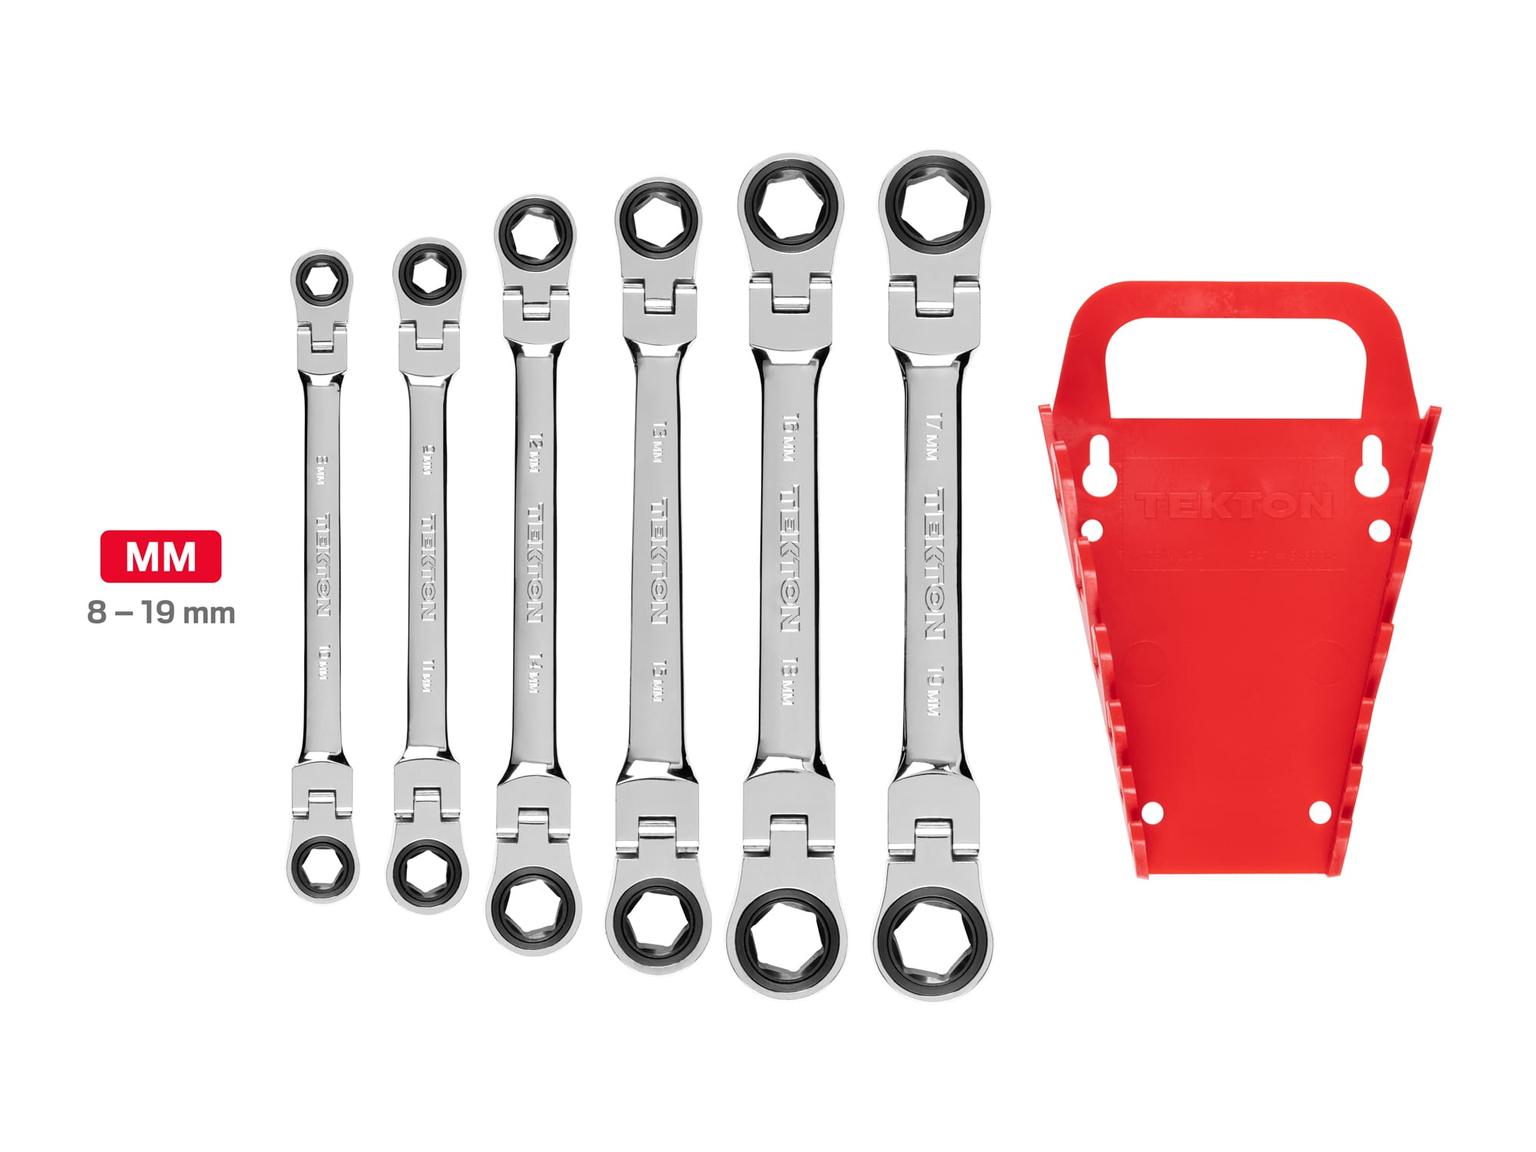 TEKTON WRN76164-T Flex Ratcheting Box End Wrench Set with Holder, 6-Piece (8-19 mm)